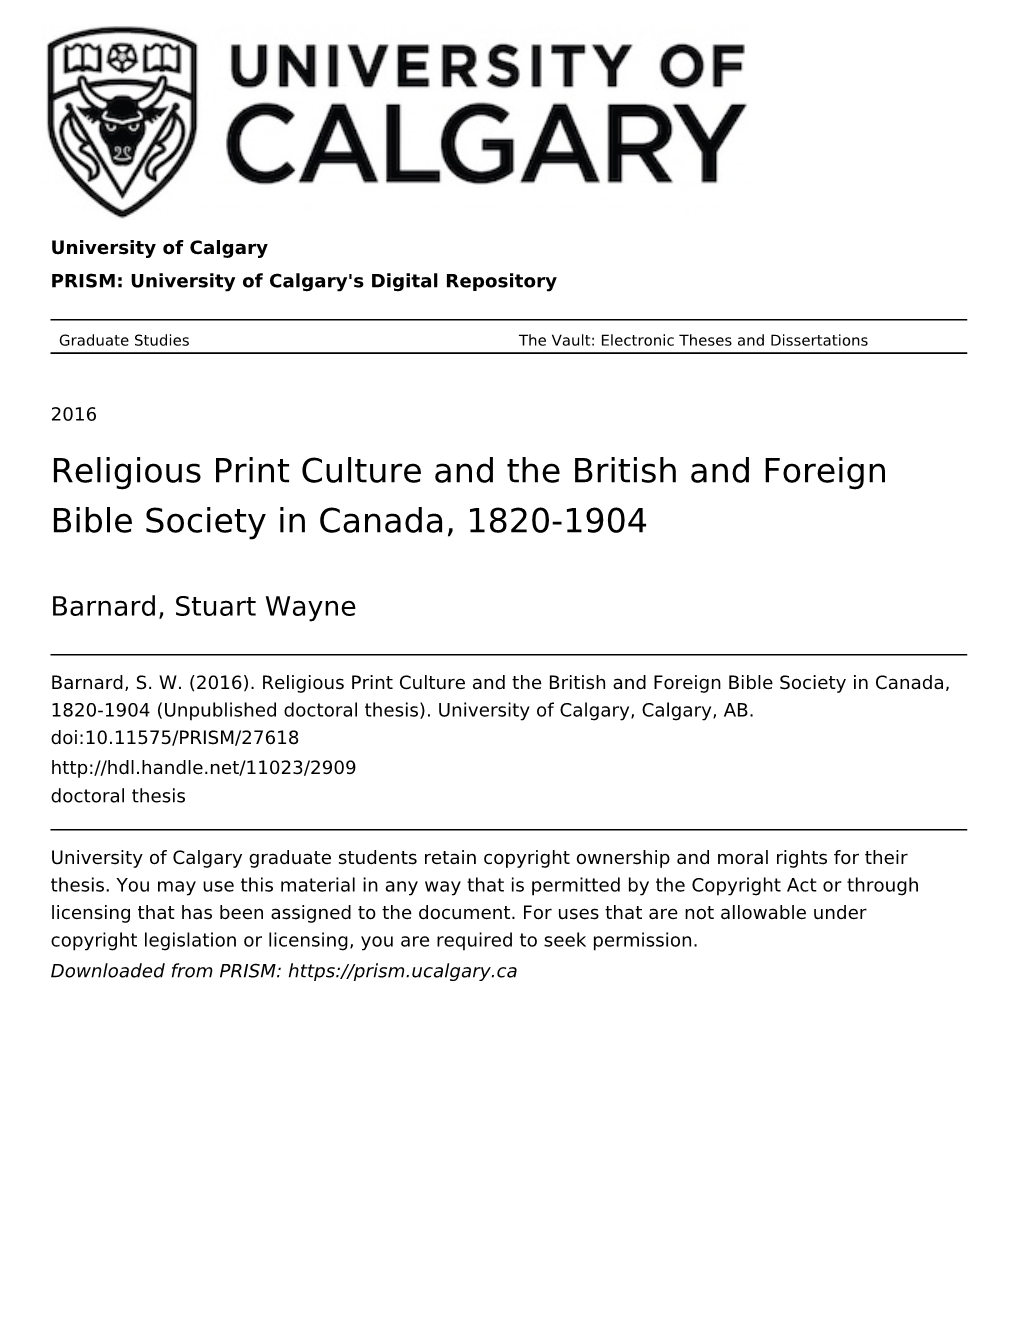 Religious Print Culture and the British and Foreign Bible Society in Canada, 1820-1904